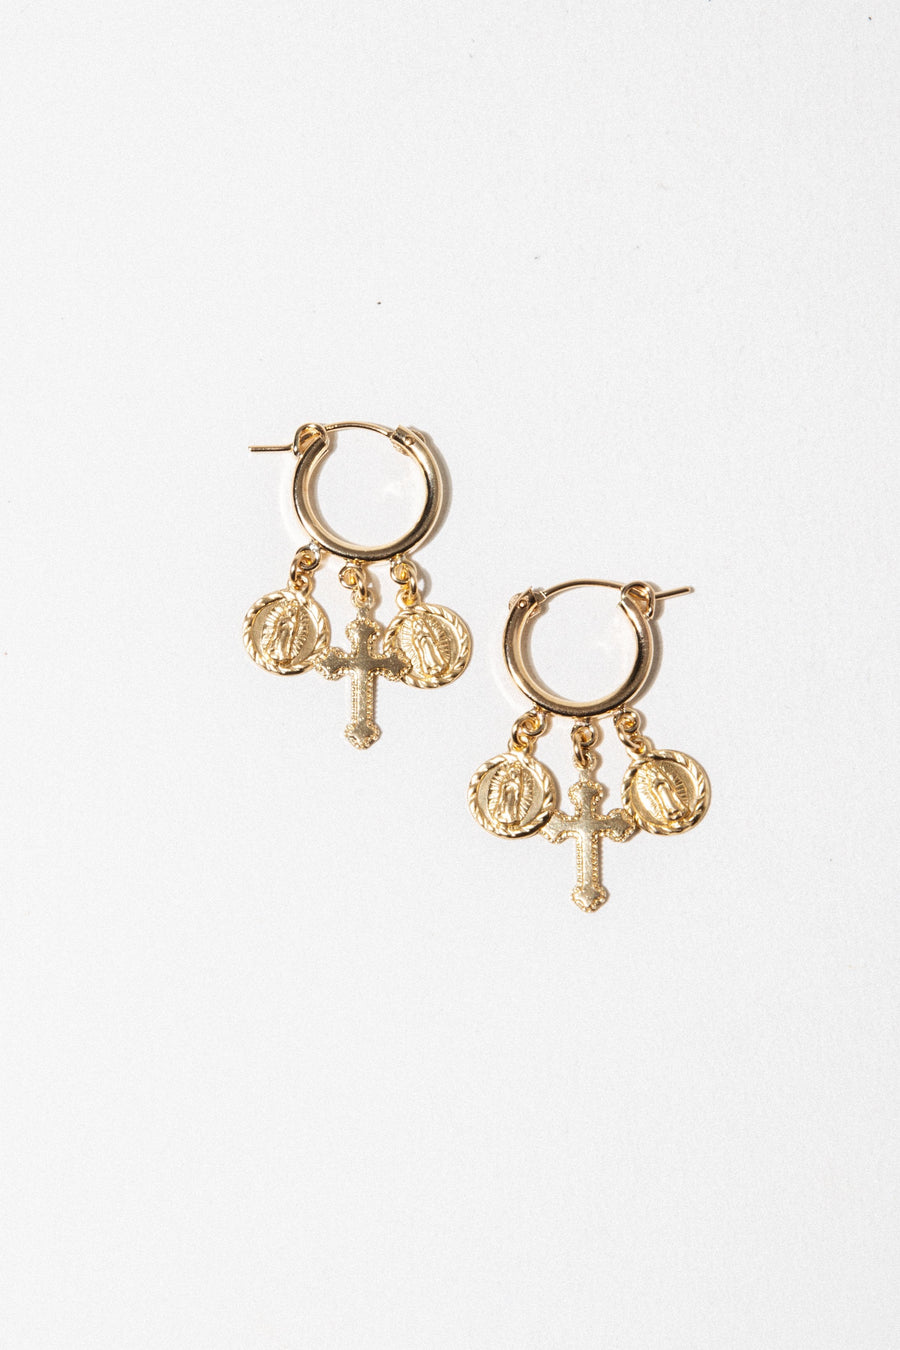 CGM Jewelry Gold Hail Mary Earring